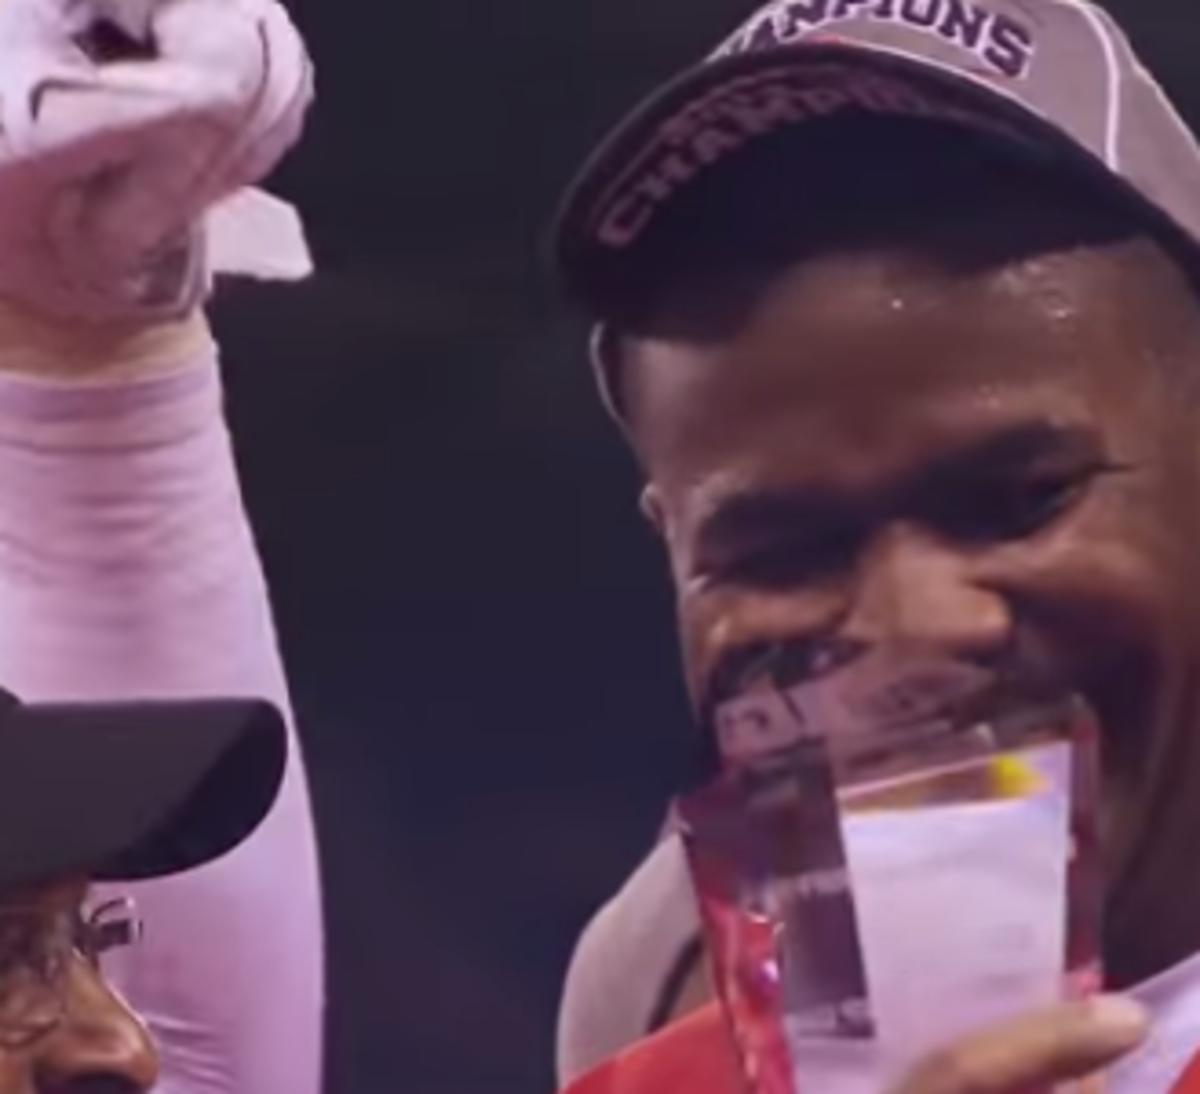 Cardale Jones smiles holding a trophy.